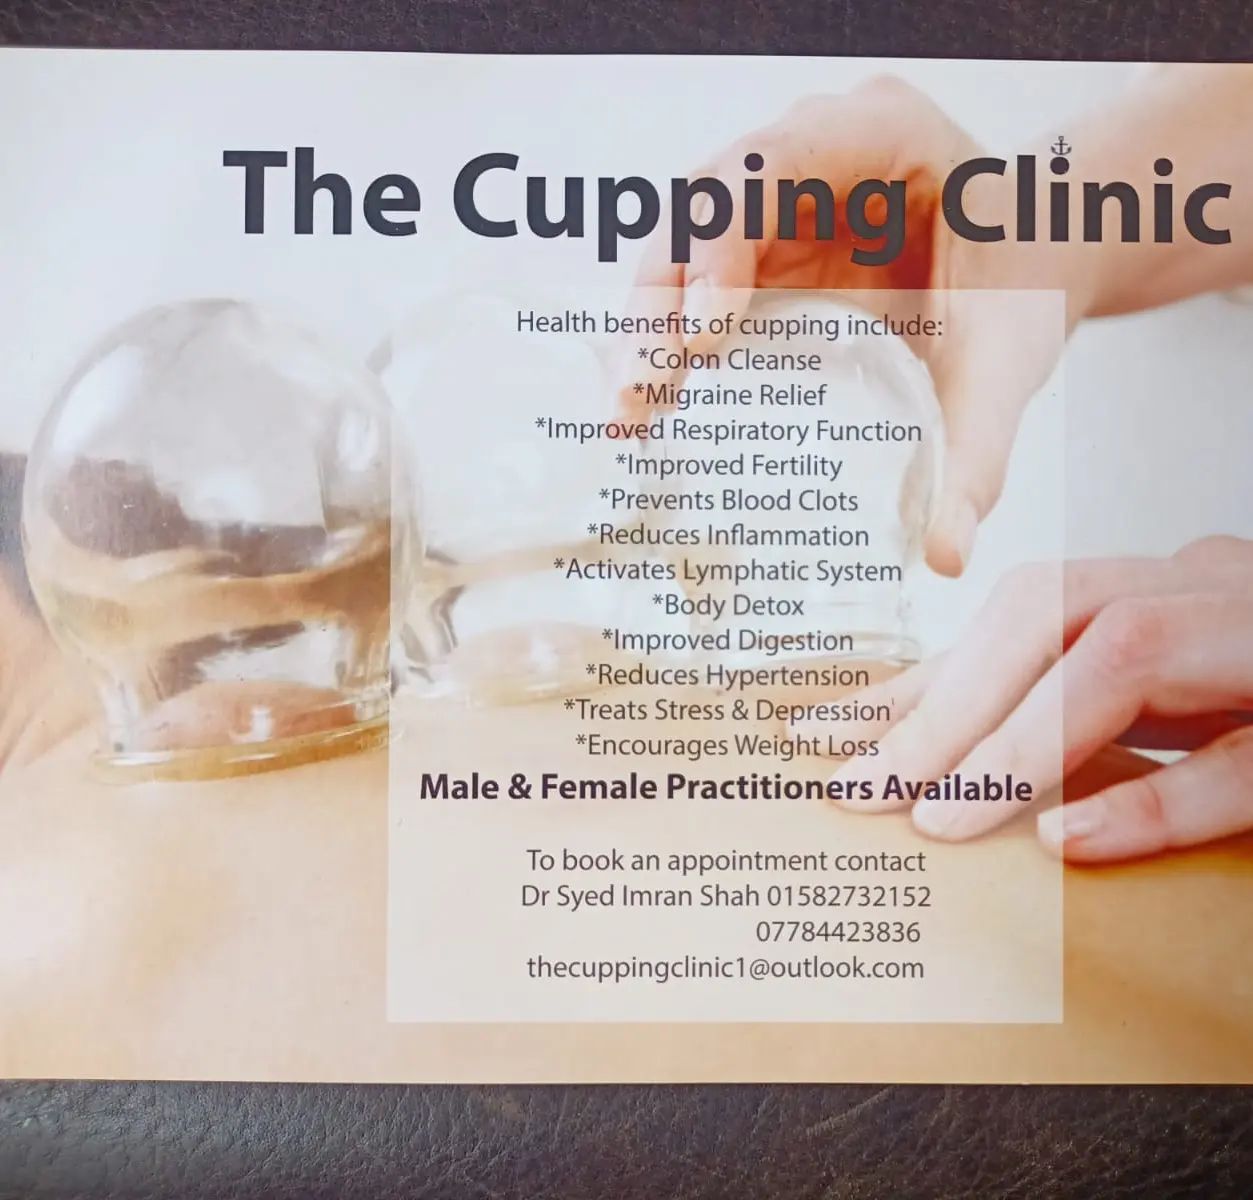 So it's official 🤩🤩🤩!! We have joined up with the cupping clinic ran by Dr Syed Imran Shah MBBS to offer cupping/hijama therapy to our members and general members of public at our FACILITY 🥳 . . Sessions will be available . Tuesday 5pm to 9pm £35 (PREBOOK) . Therapy will be done in a private area . So book today ! . #hijama #lutoncupping #cuppingclinic #hijamatherapy #doctor #quality #certified #fitnessluton #mentalhealth #mentalhealthluton #hijamaluton #cuppingluton #mmafacility #allunder1roof